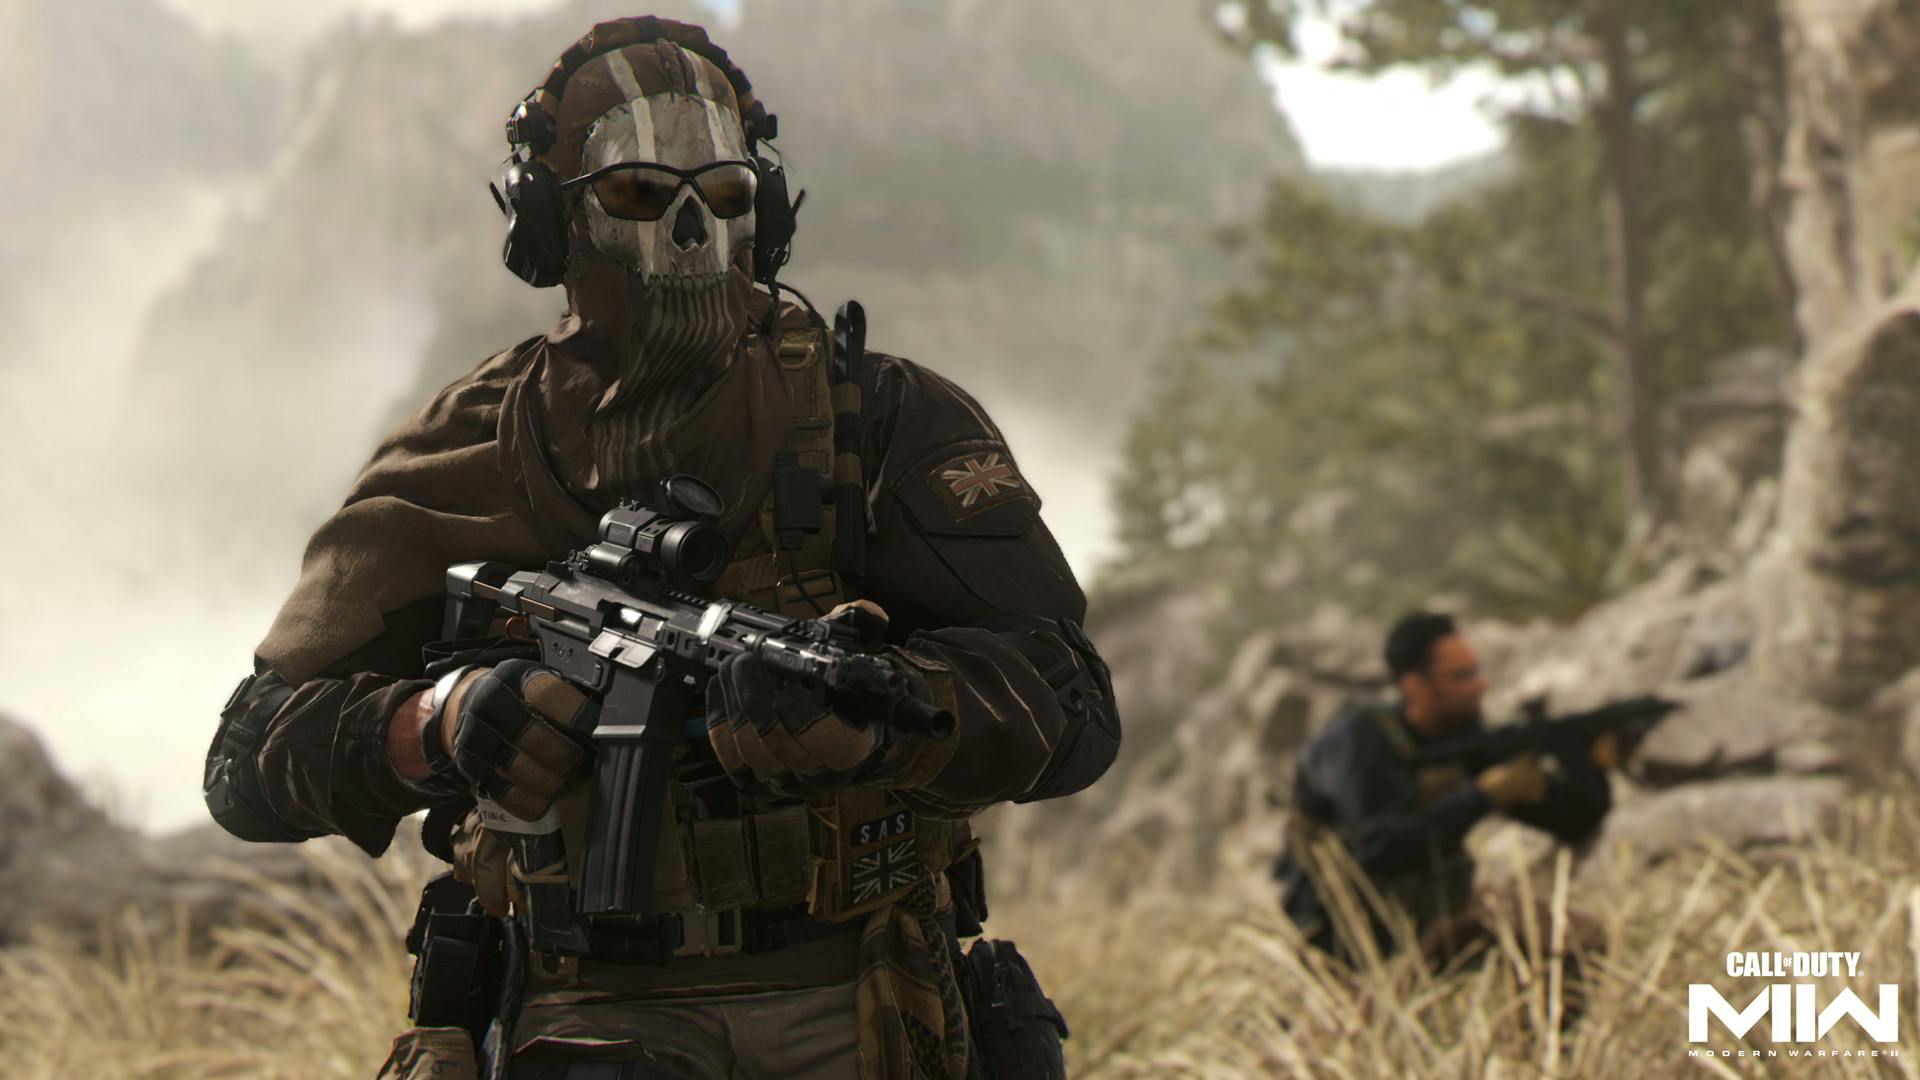 Don’t worry if you couldn’t spot enemies in the MW2 beta—Infinity Ward is working on it